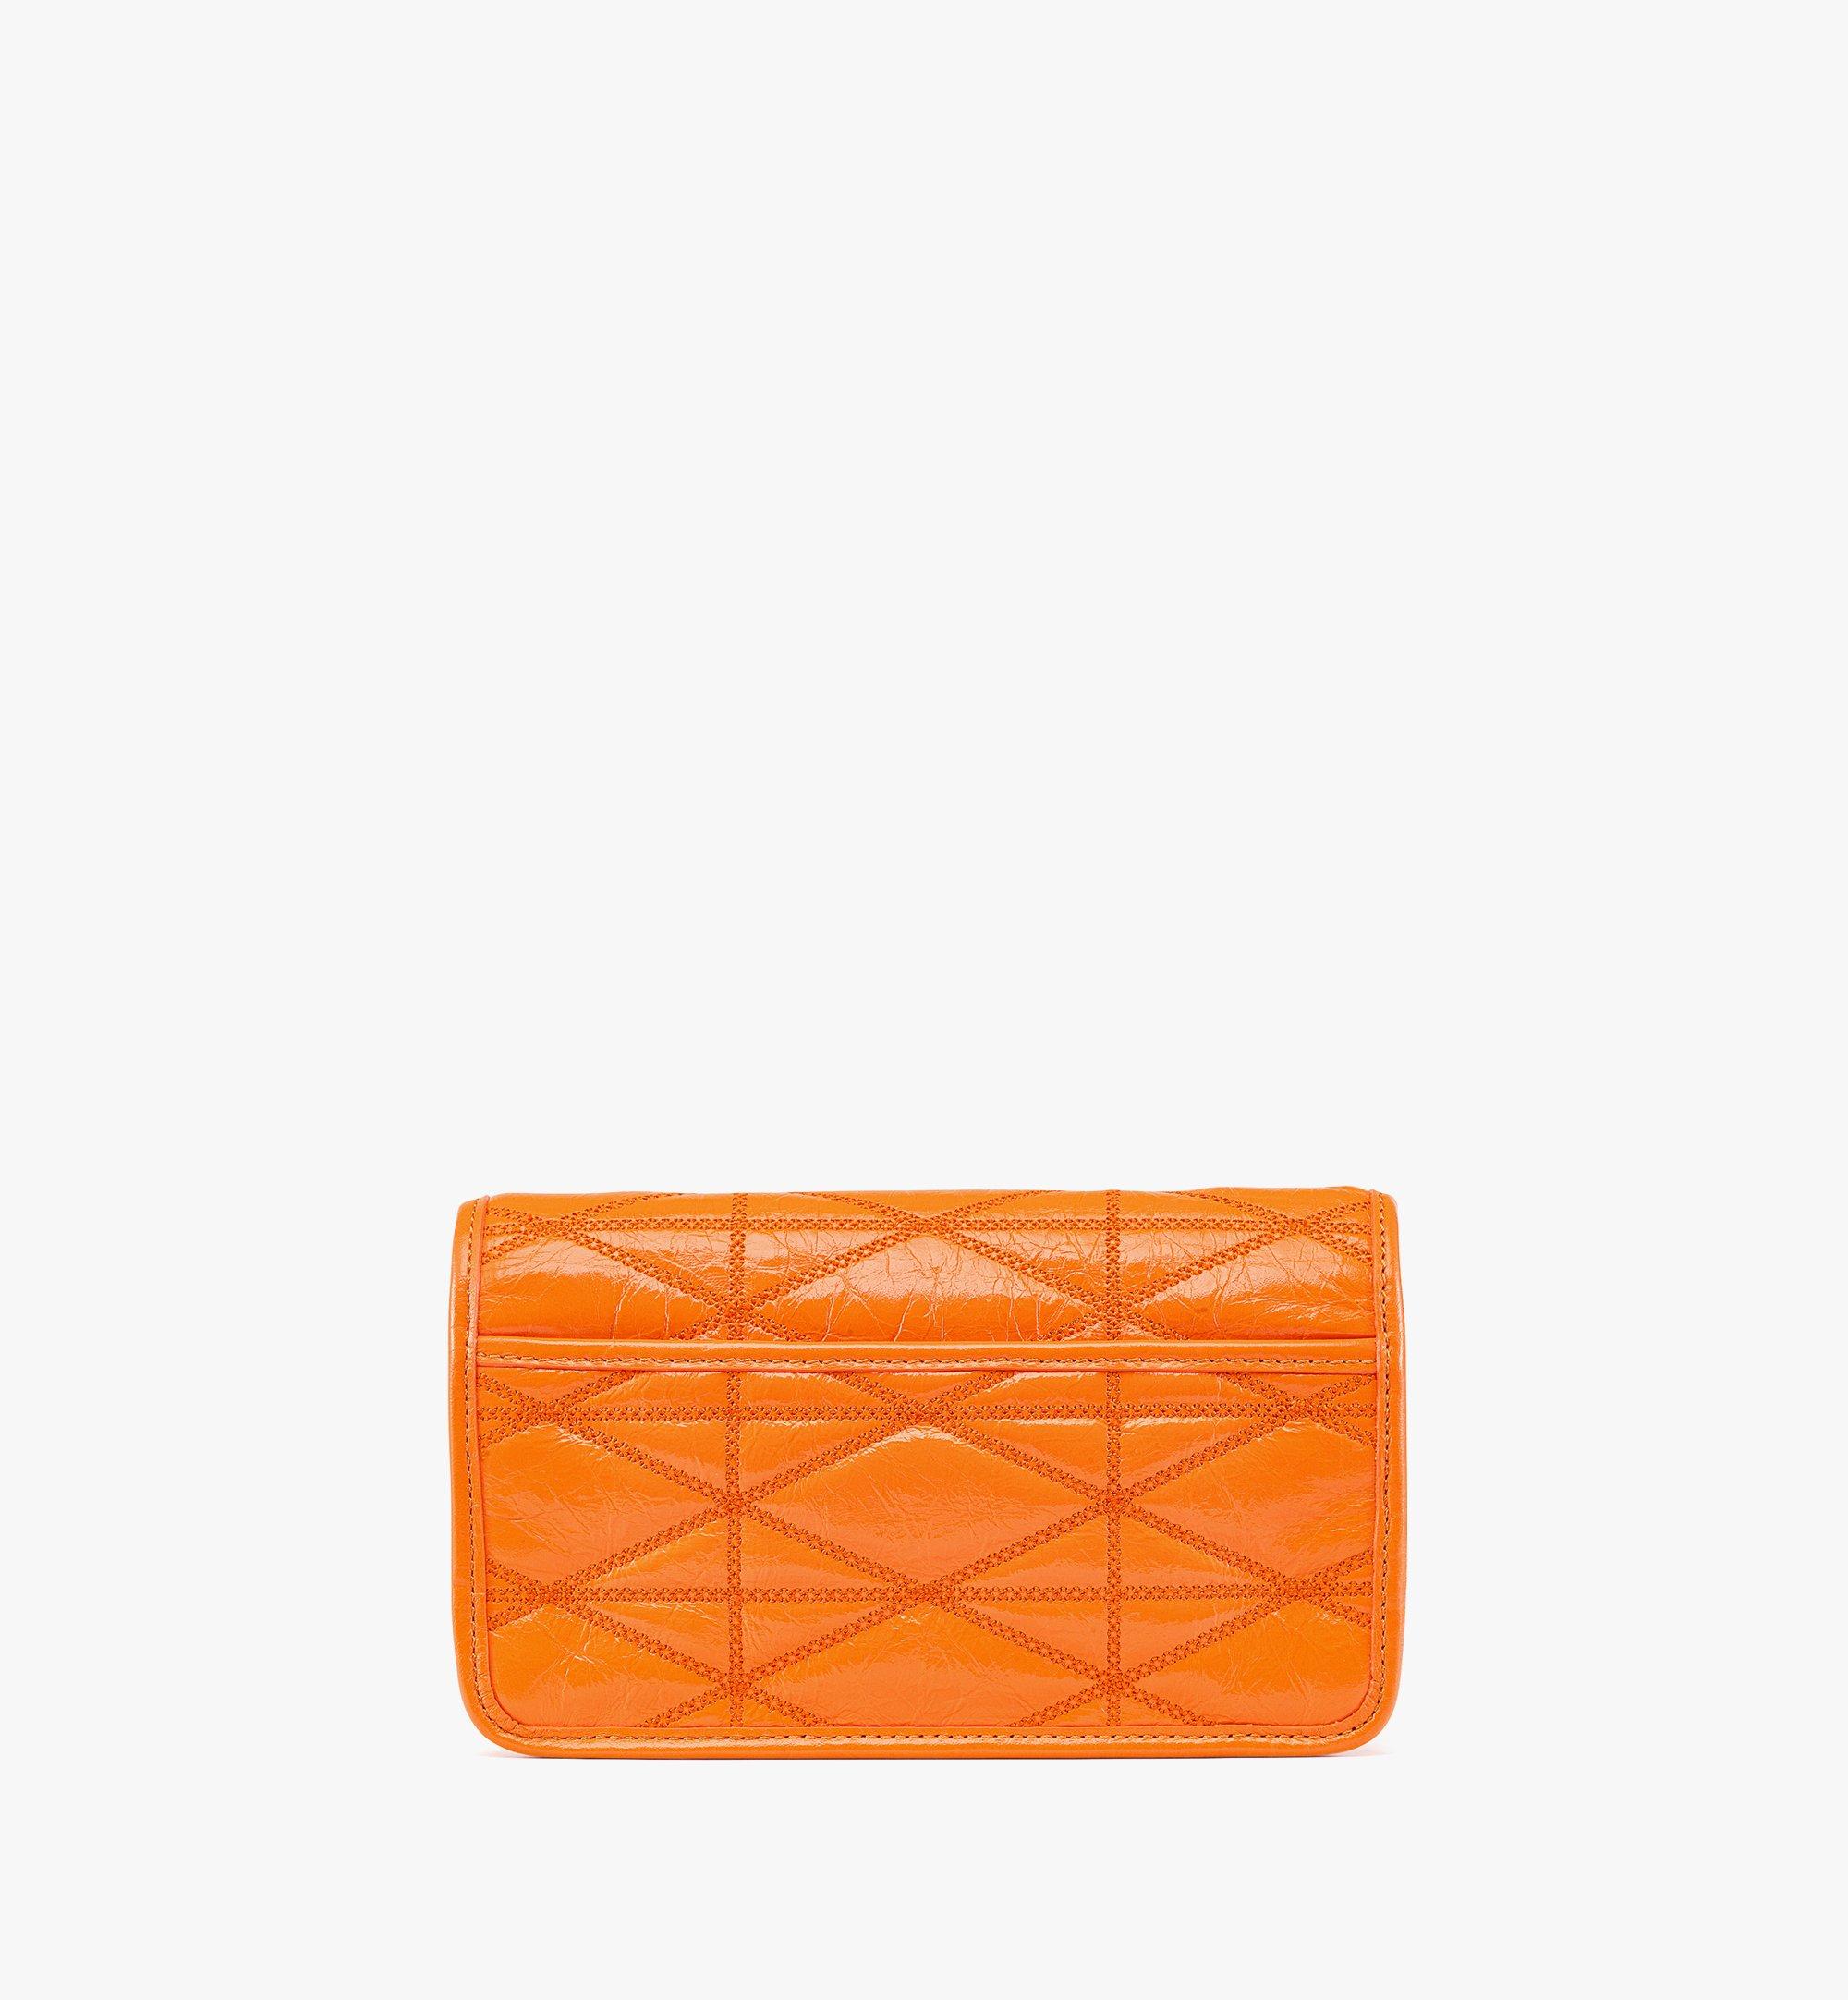 MCM Travia Quilted Chain Wallet in Crushed Leather Orange MYLDALM01O0001 Alternate View 3